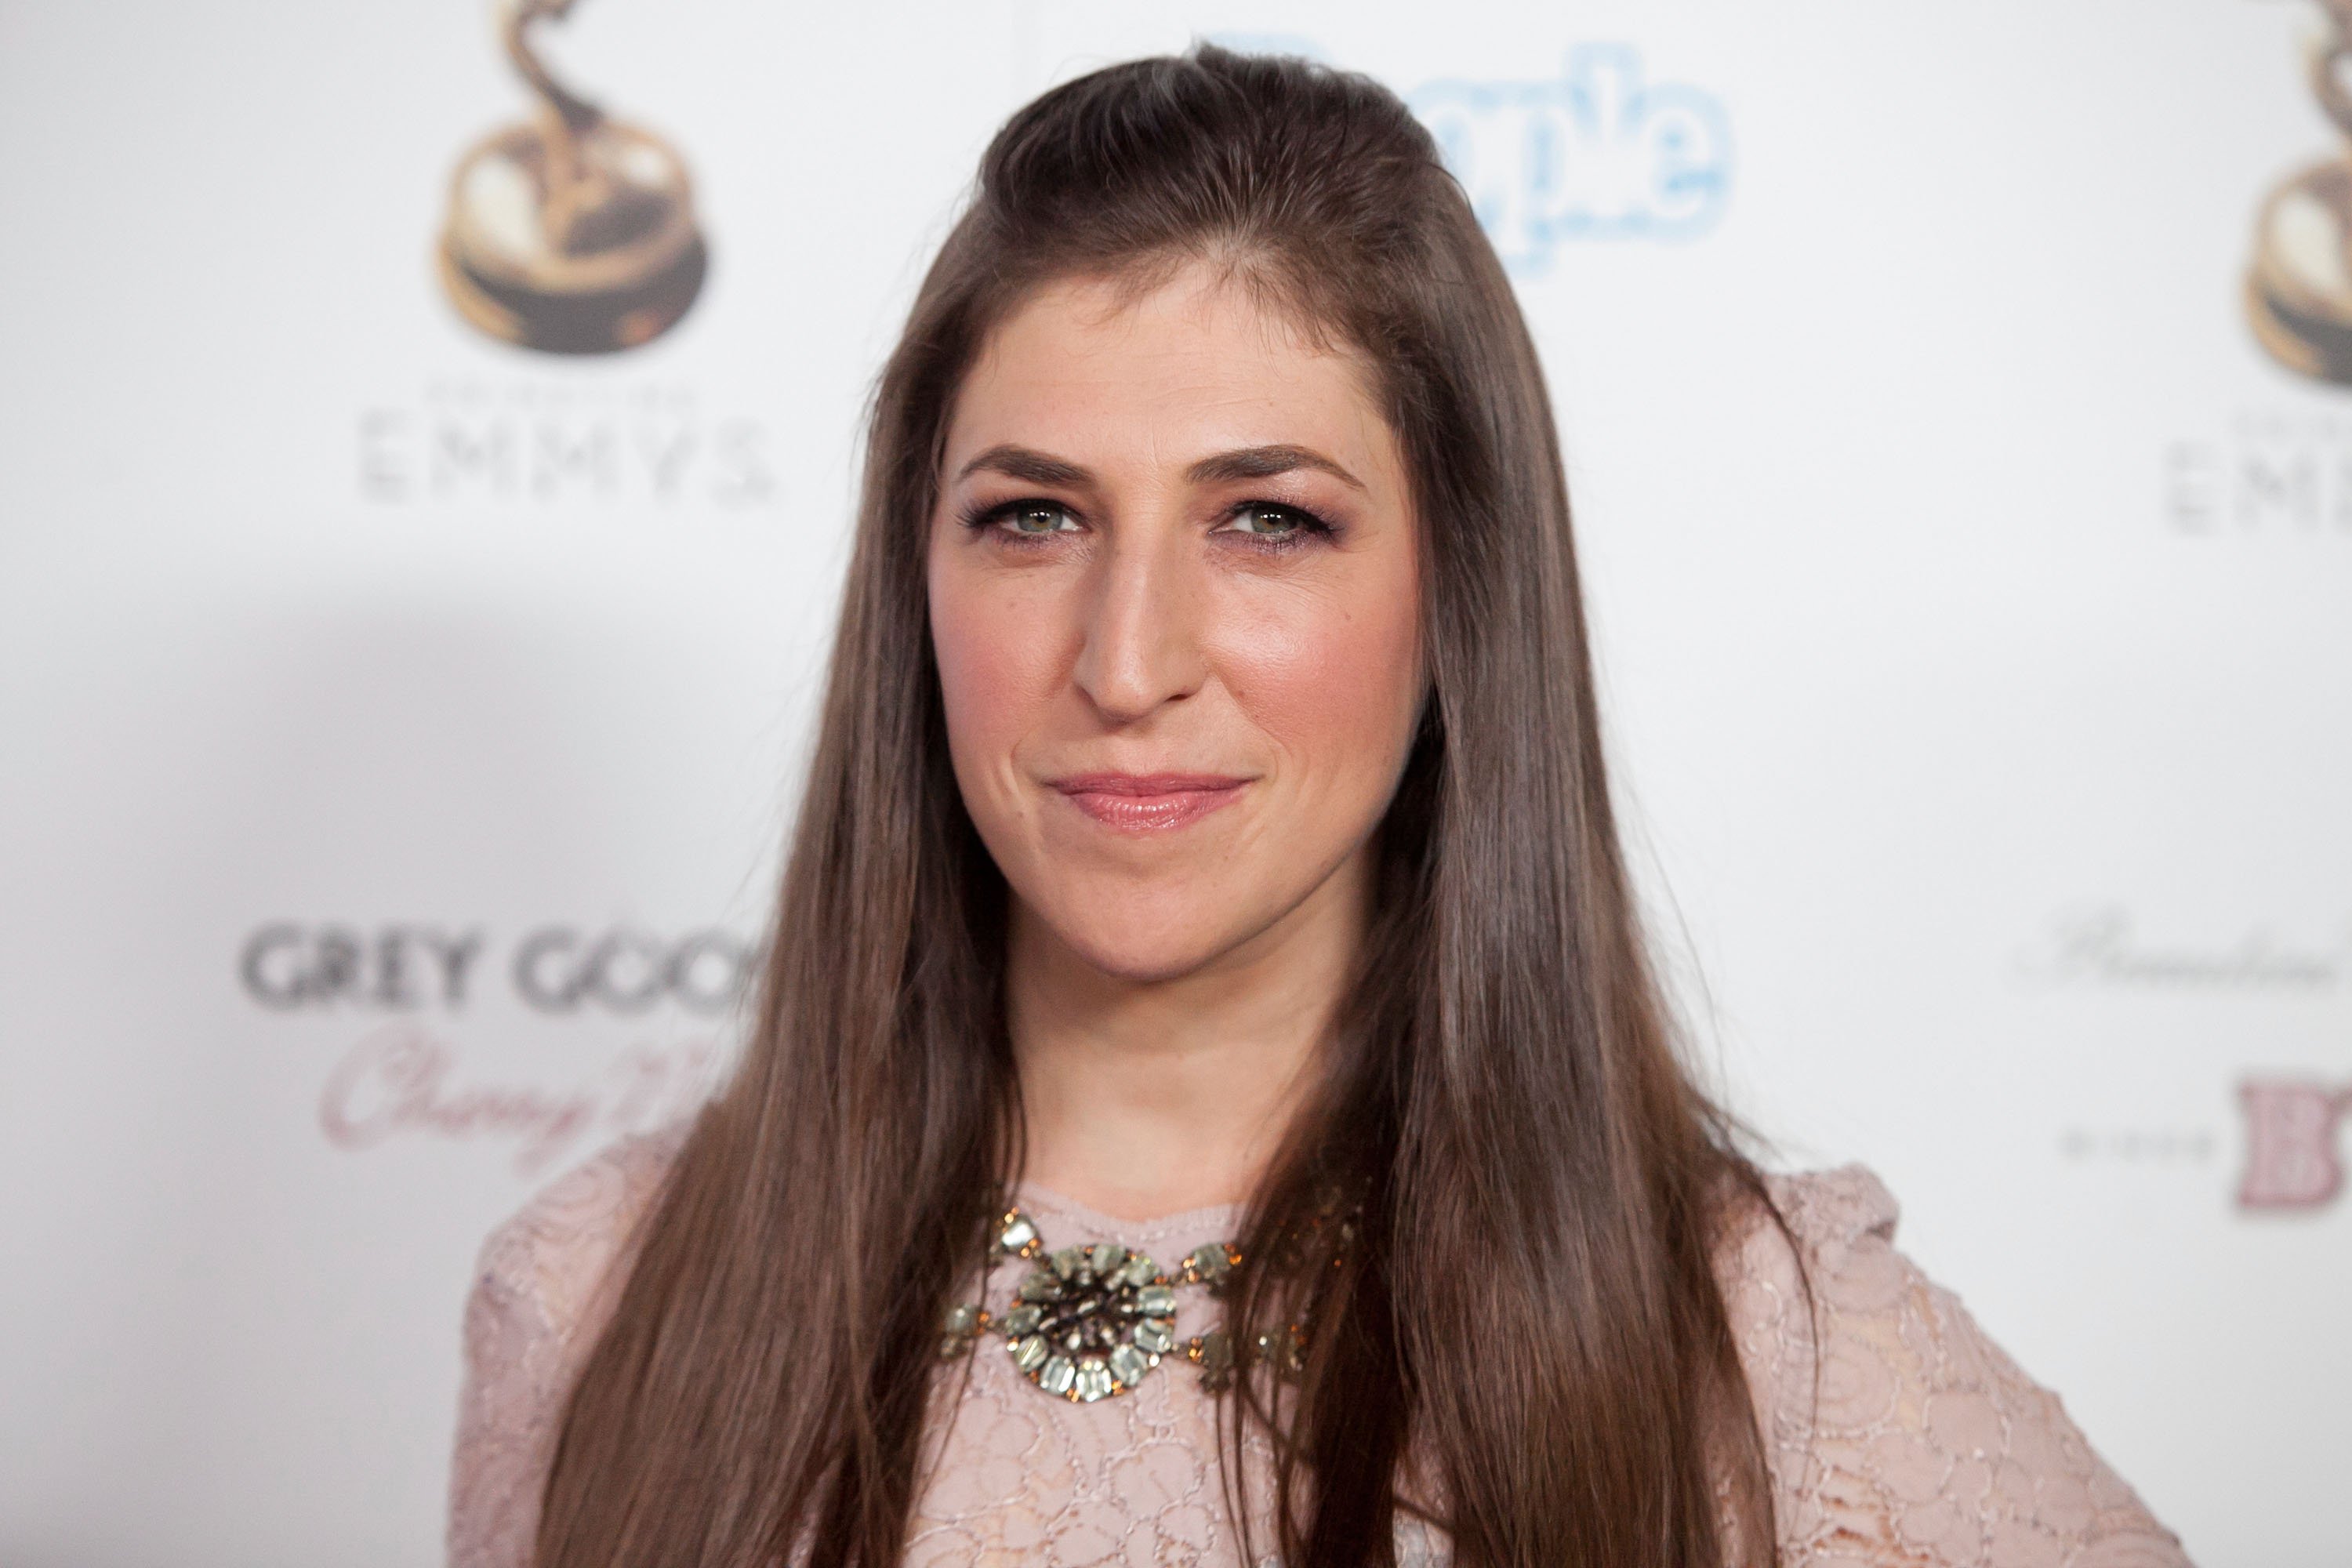 Mayim Bialik attends The Academy Of Television Arts & Sciences Performer Nominees' 64th Primetime Emmy Awards Reception